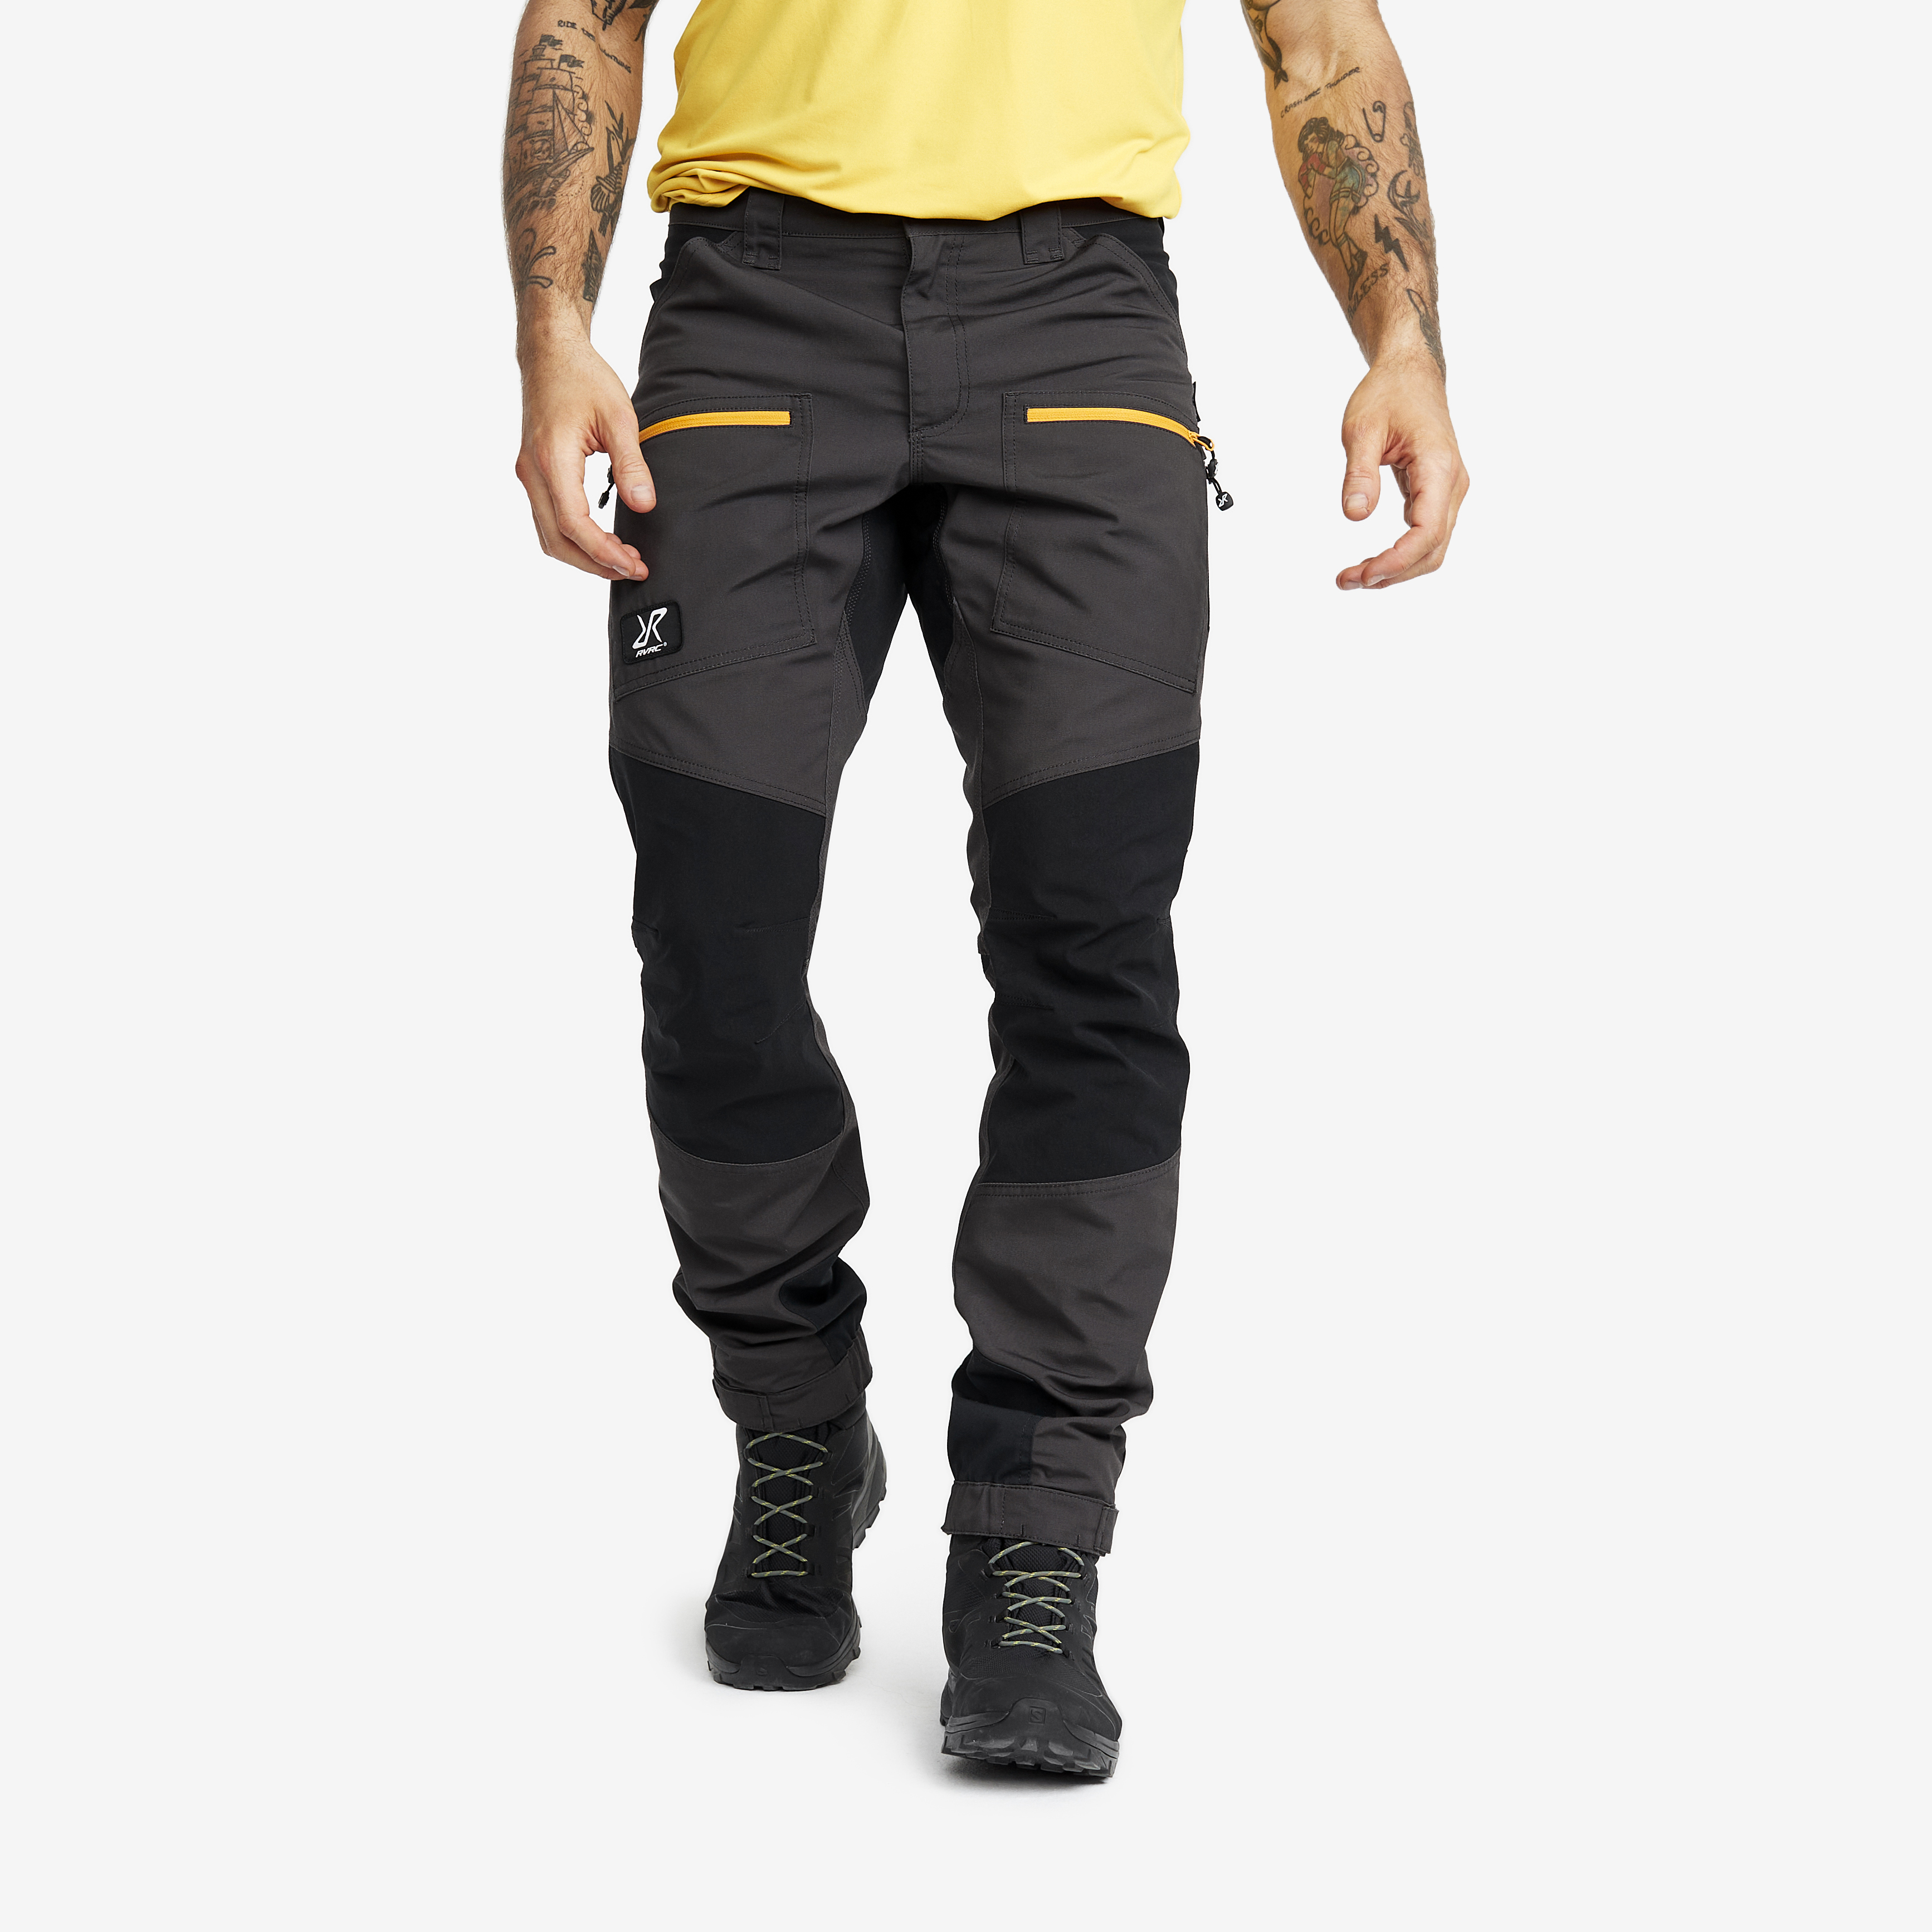 Nordwand Pro Pants Anthracite/Radiant Yellow Heren